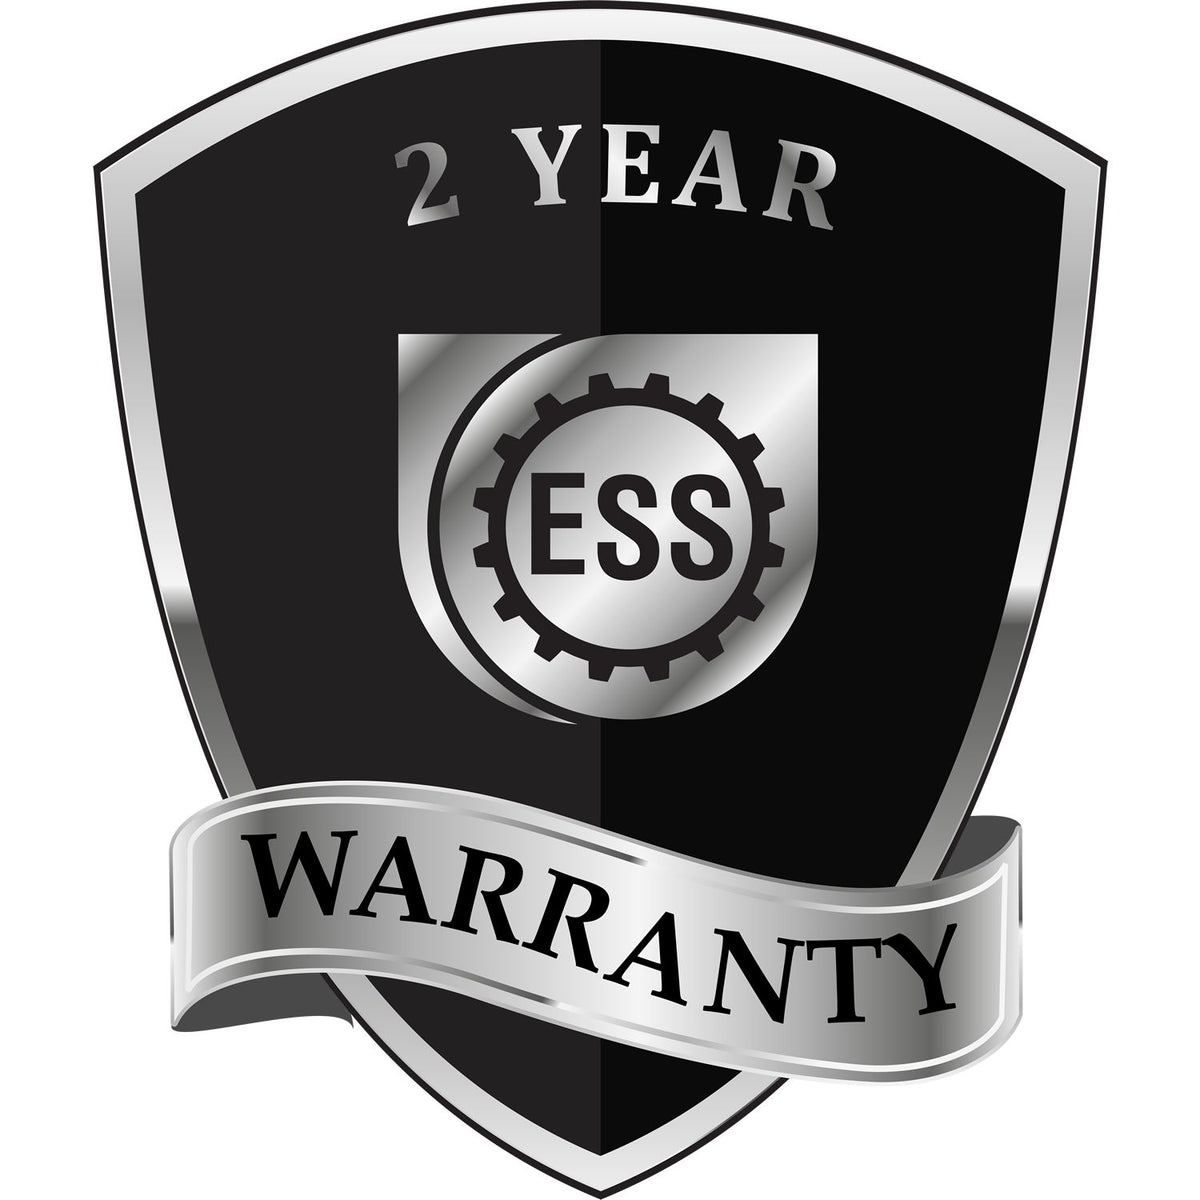 A badge or emblem showing a warranty icon for the Georgia Engineer Desk Seal